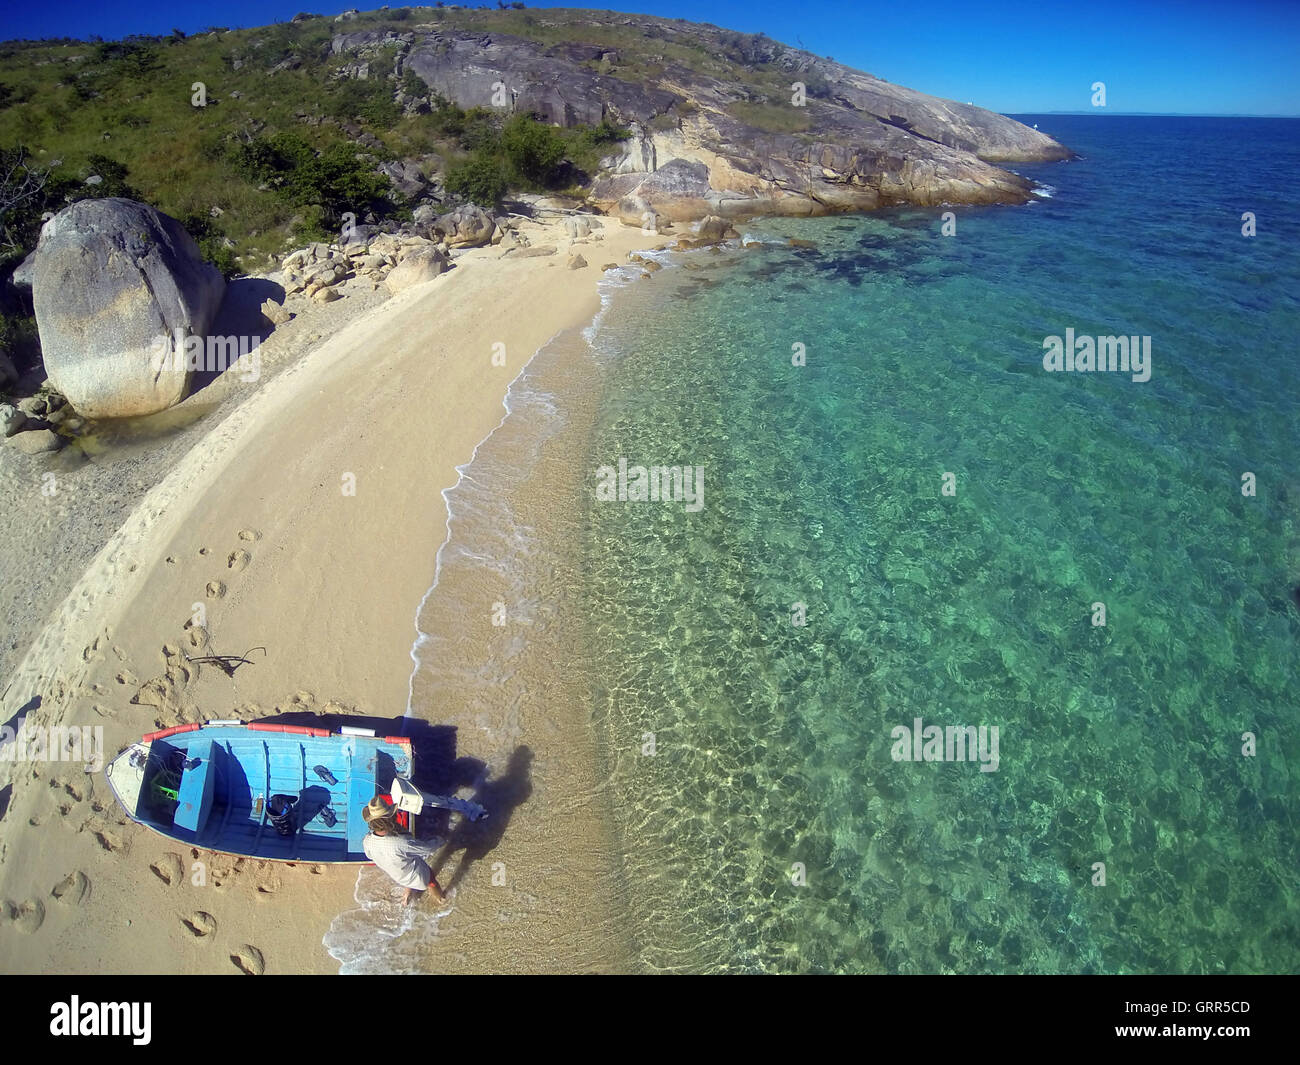 Aerial view of man with dinghy on beach at Turtle Bay, Lizard Island, Great Barrier Reef Marine Park, Queensland, Australia Stock Photo